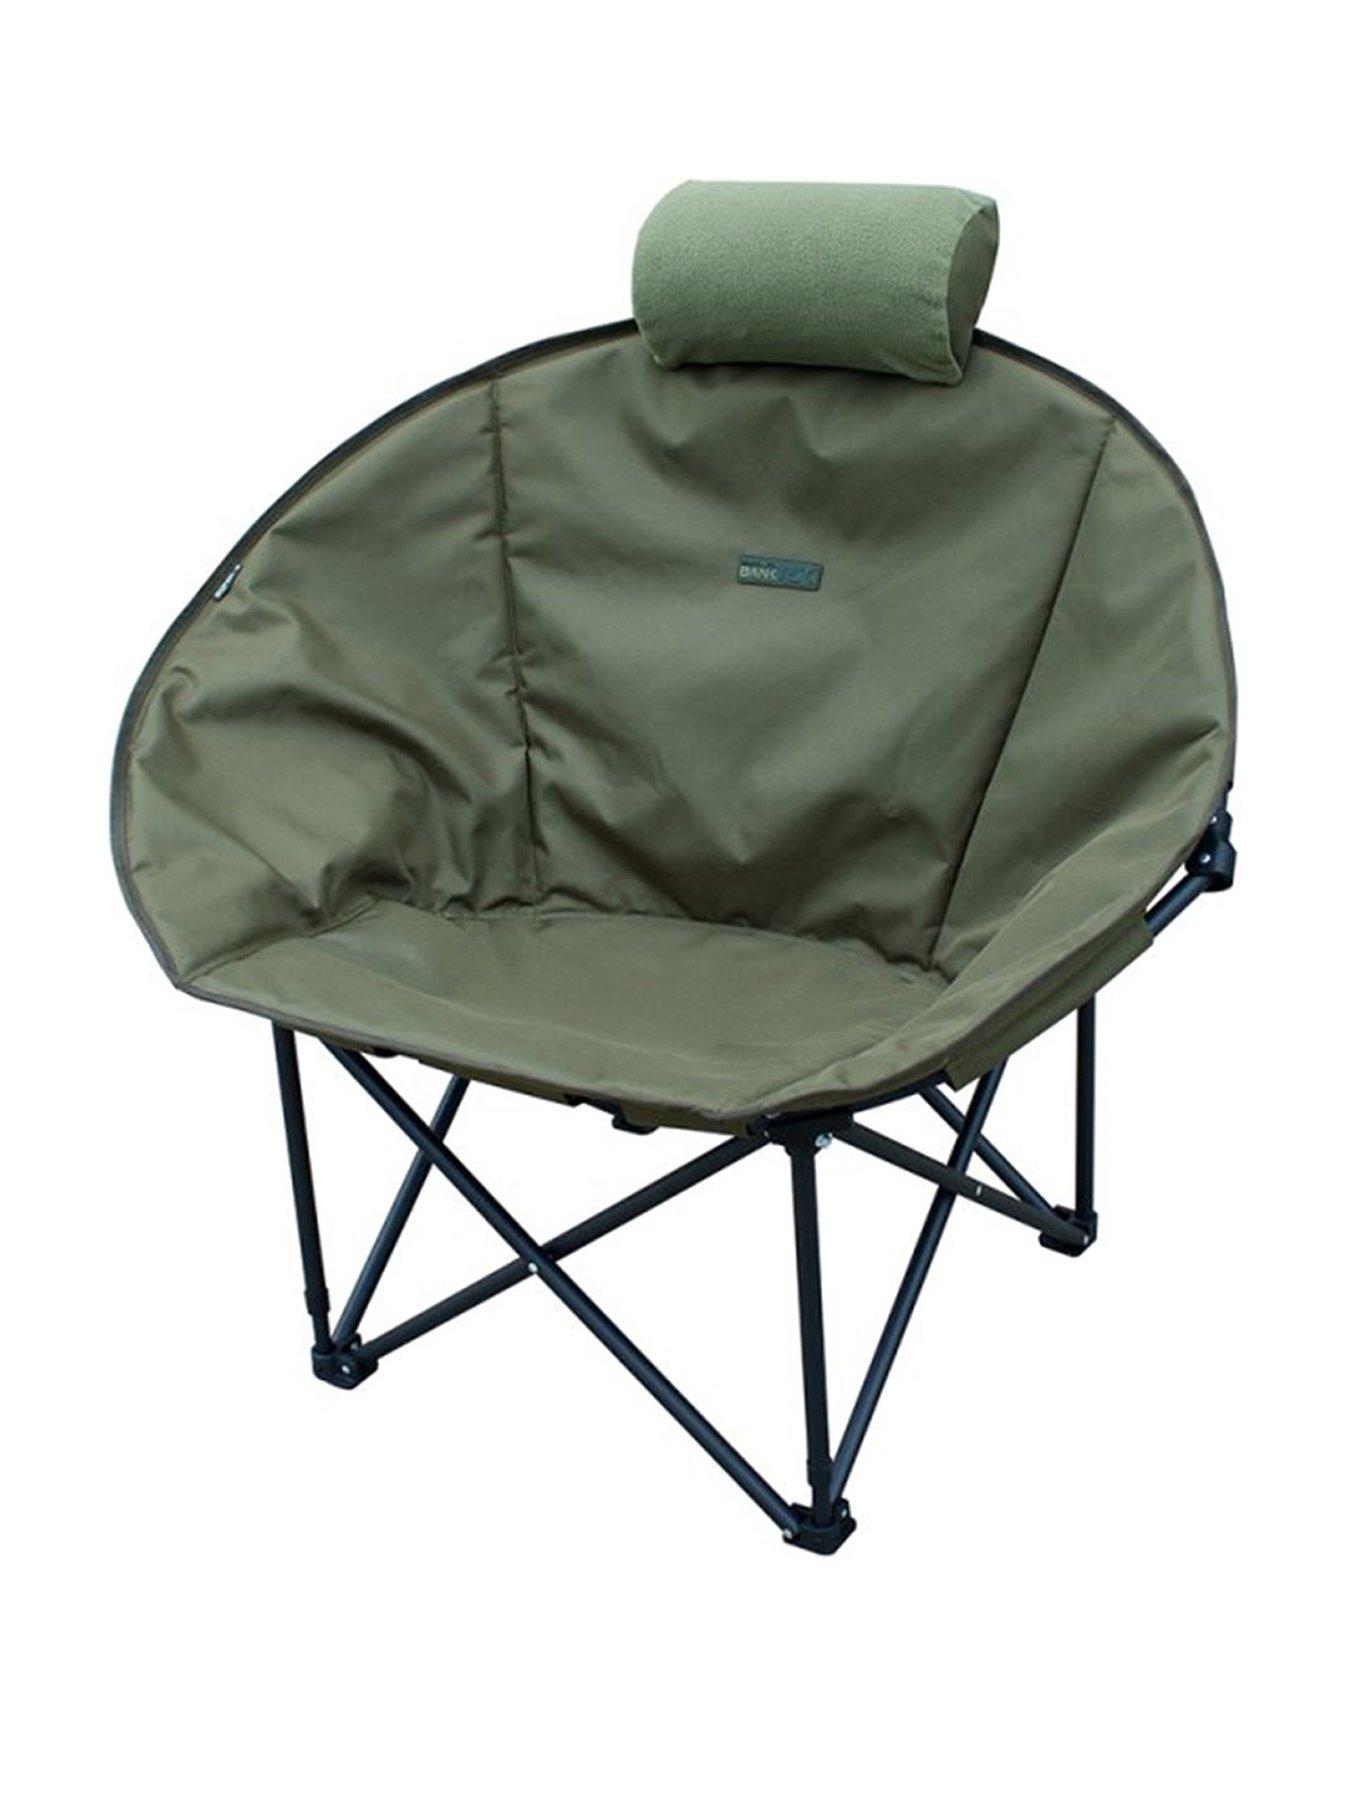 Wychwood fishing chair bed bedchair parts - Choose your part